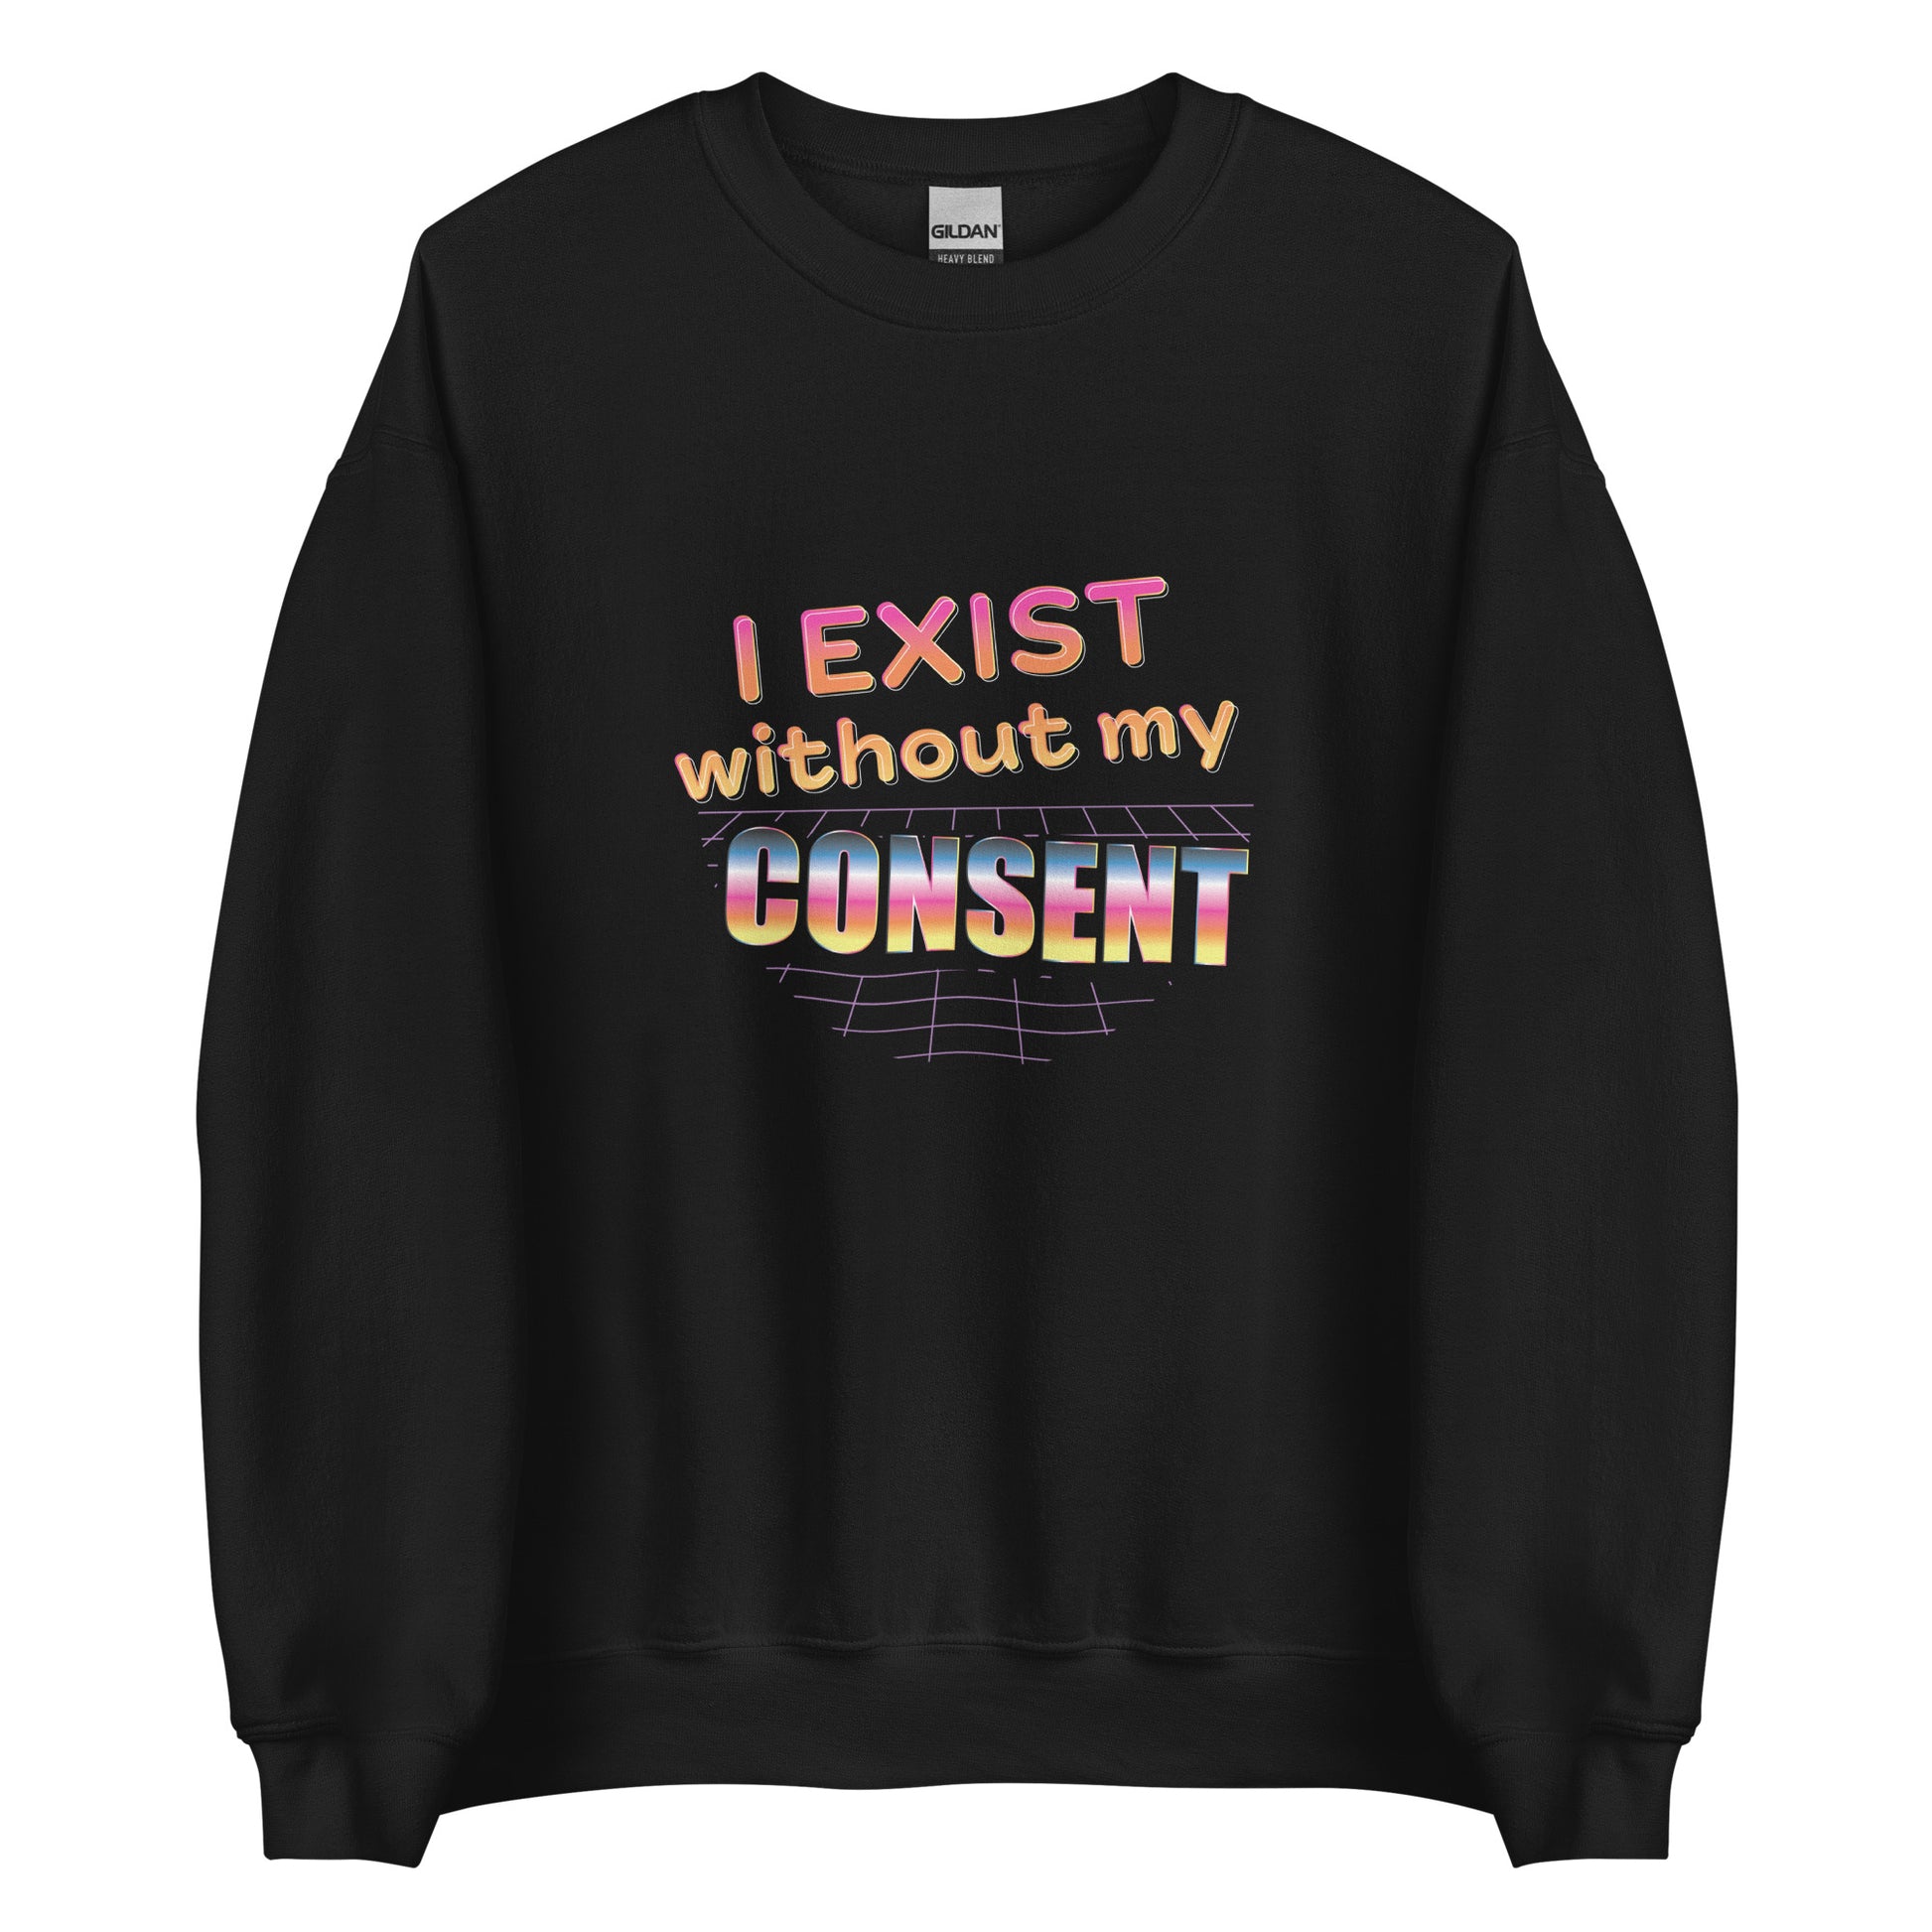 A black crewneck sweatshirt featuring a brightly colored 80's style graphic with colorful text that reads "I exist without my consent"